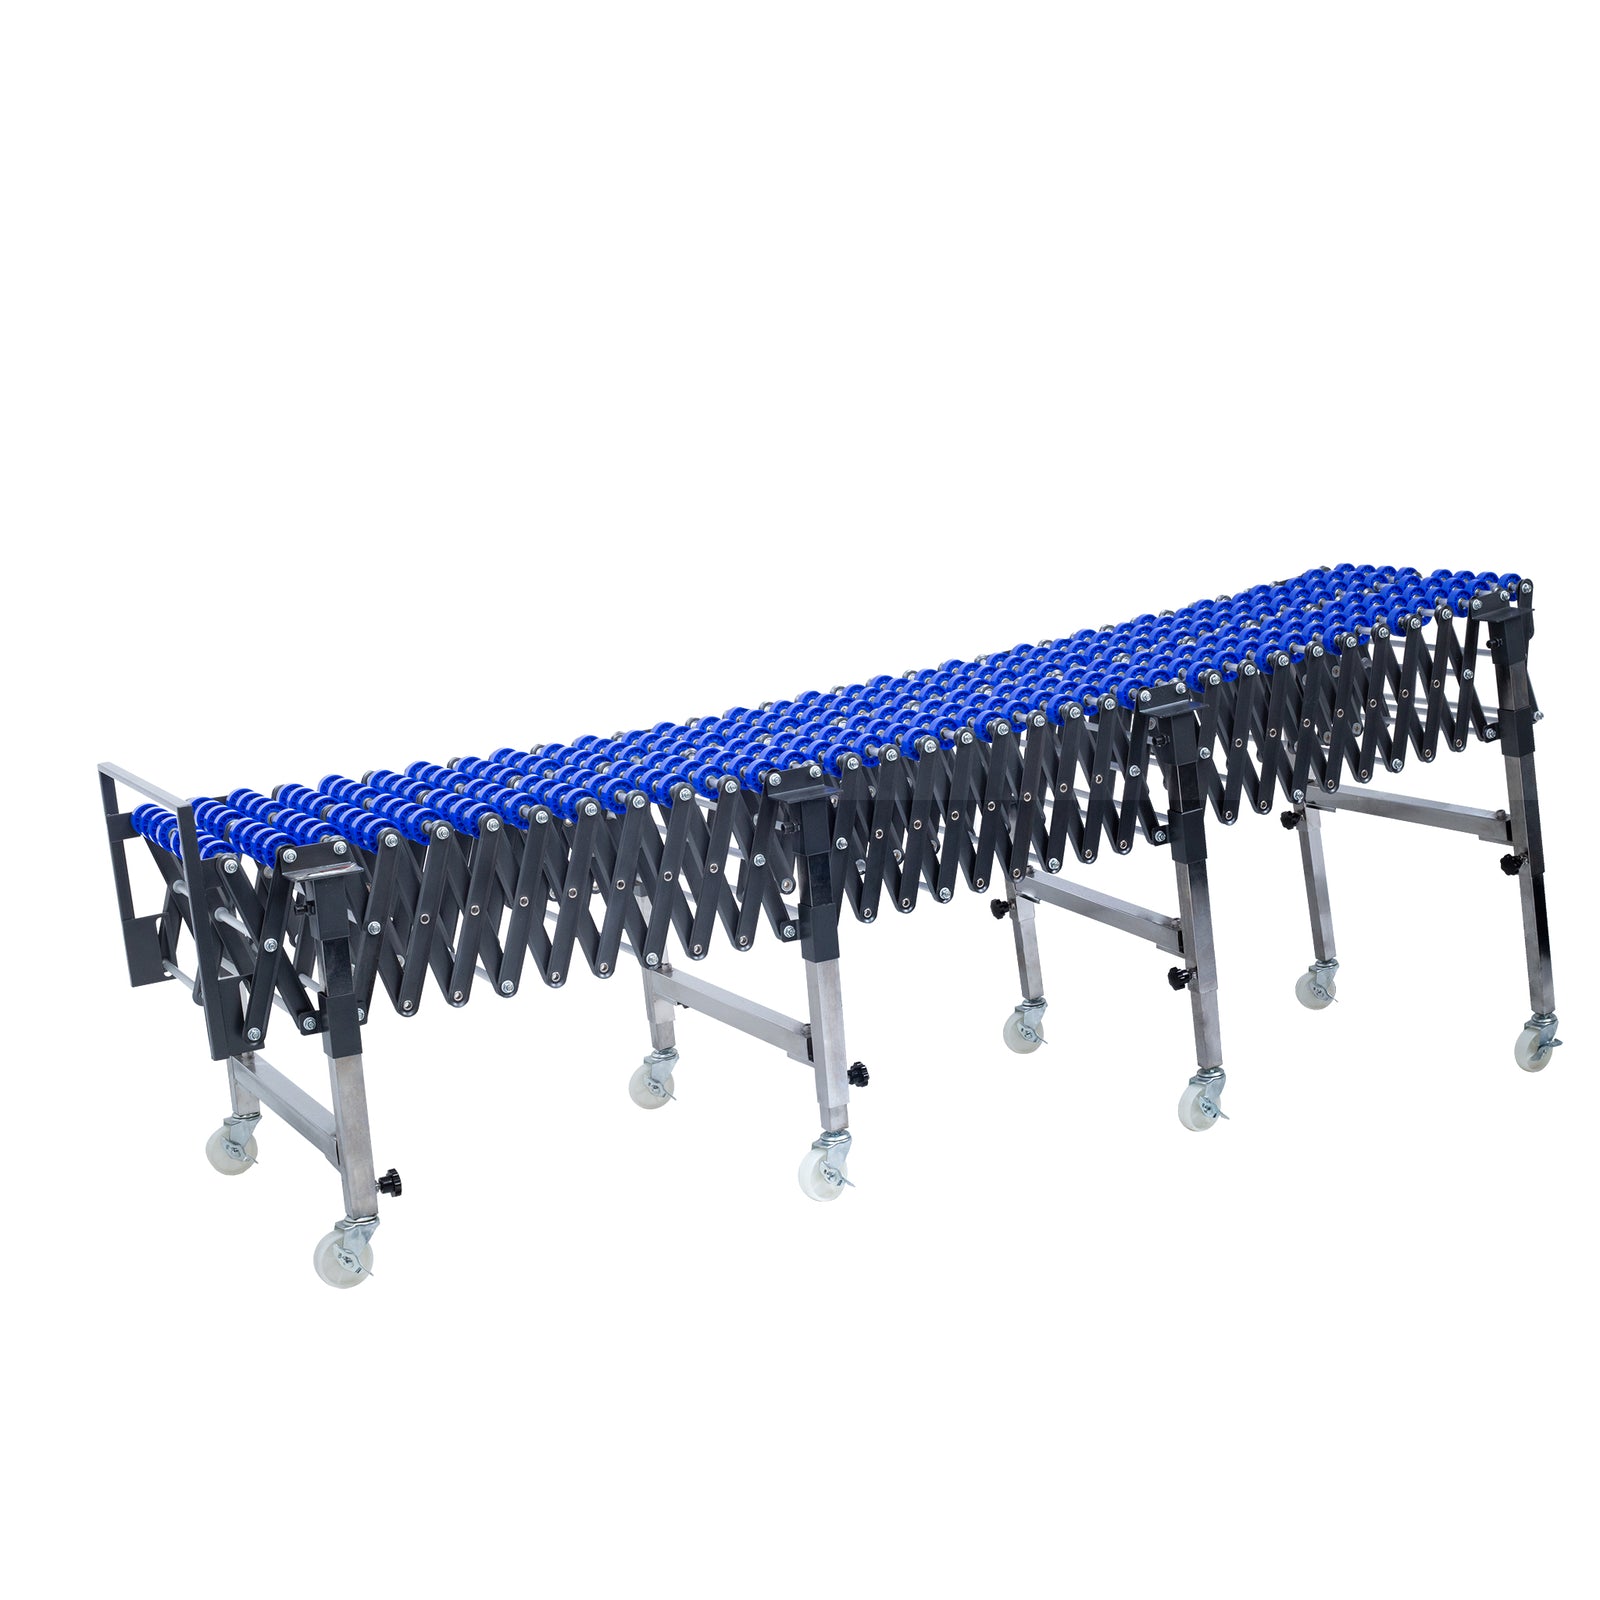 An expanded gravity skate wheel conveyor with steel frame, blue wheels, and rolling casters. Front side of the conveyor is lower that the far side